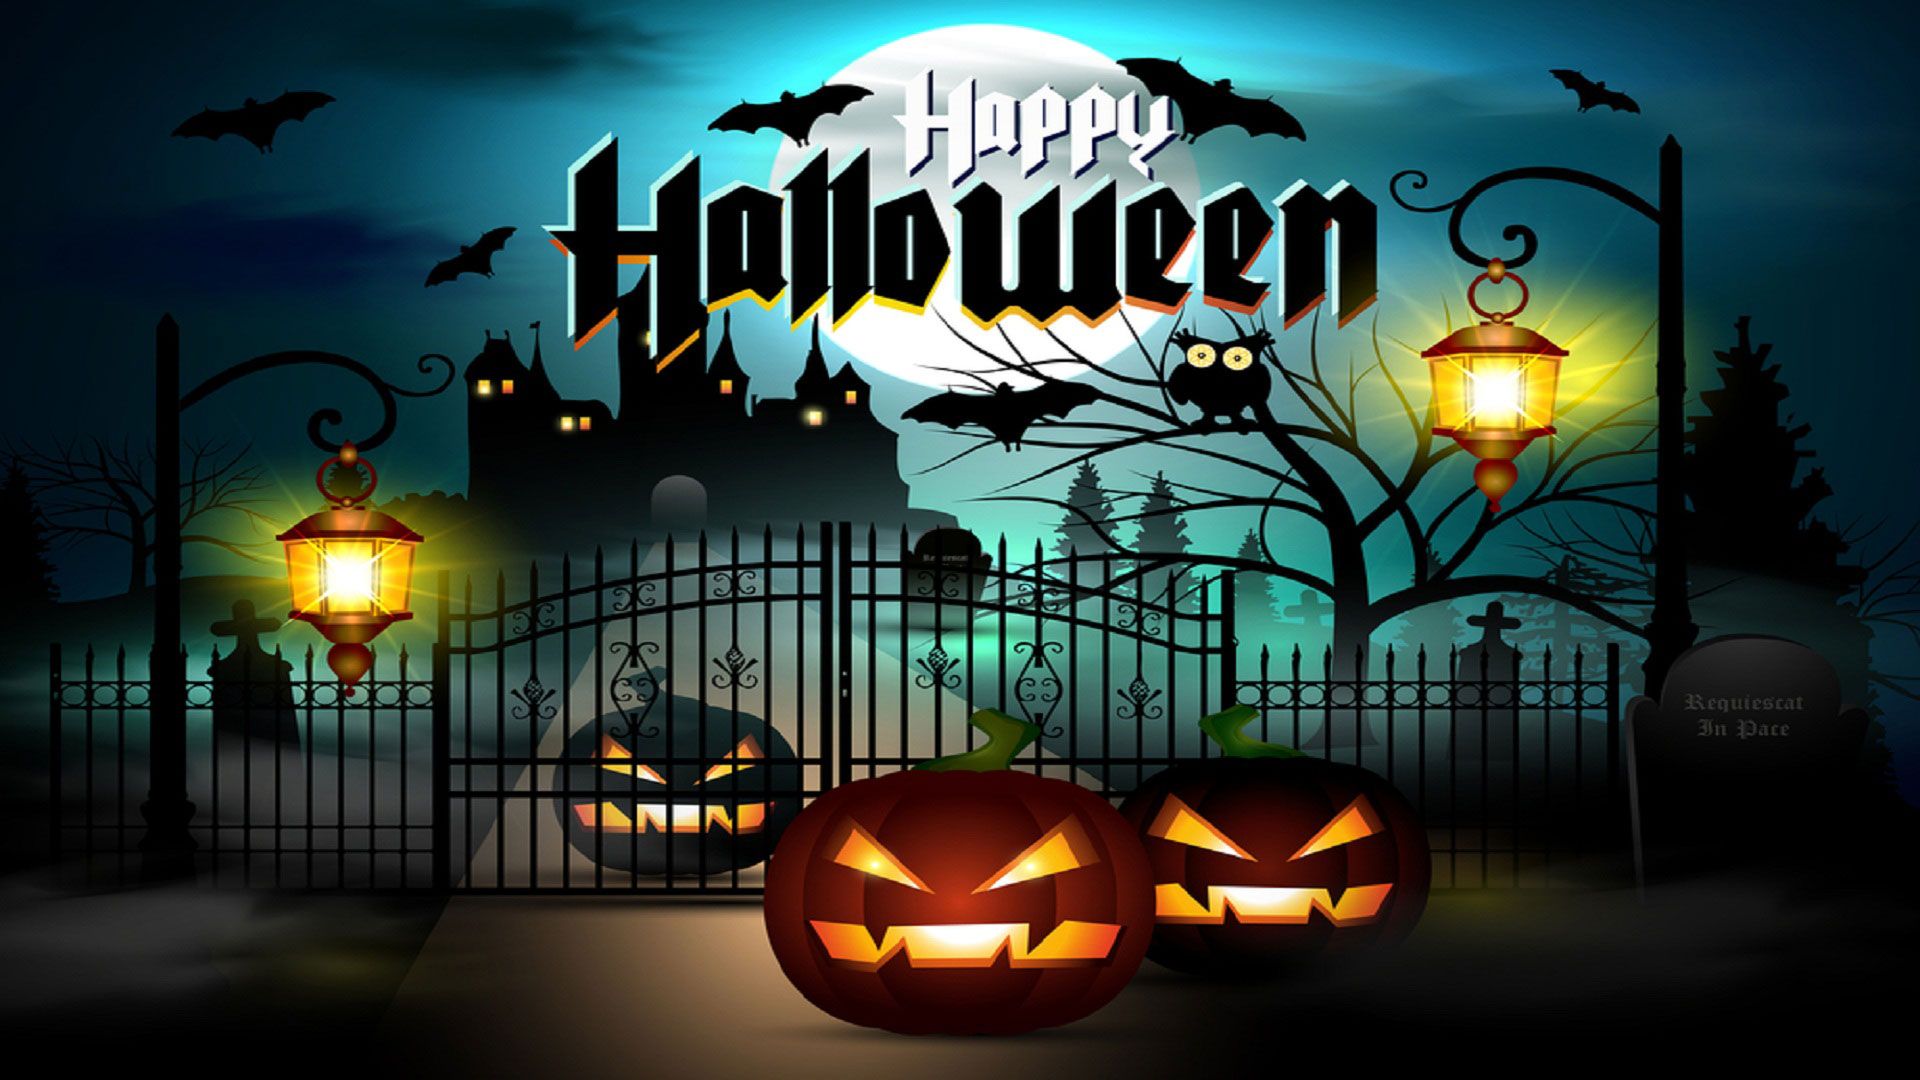 Happy Halloween 2020 Image, Quotes, Wishes, Picture